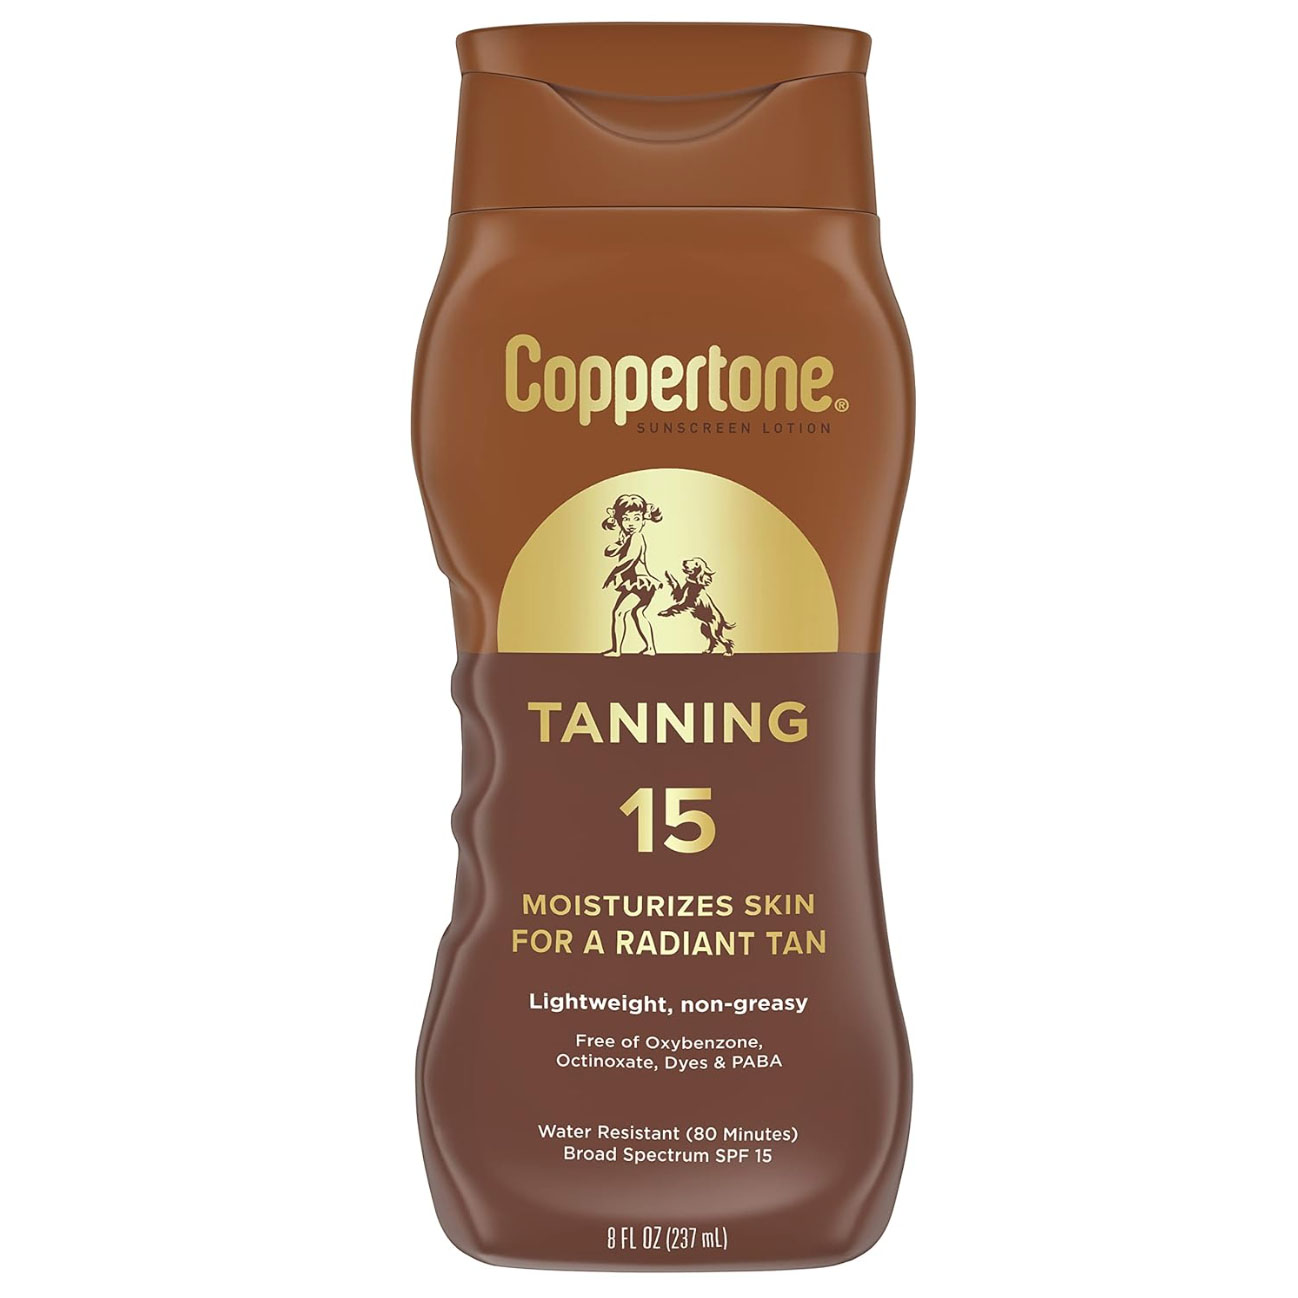 Coppertone Tanning Sunscreen Lotion in brown bottle